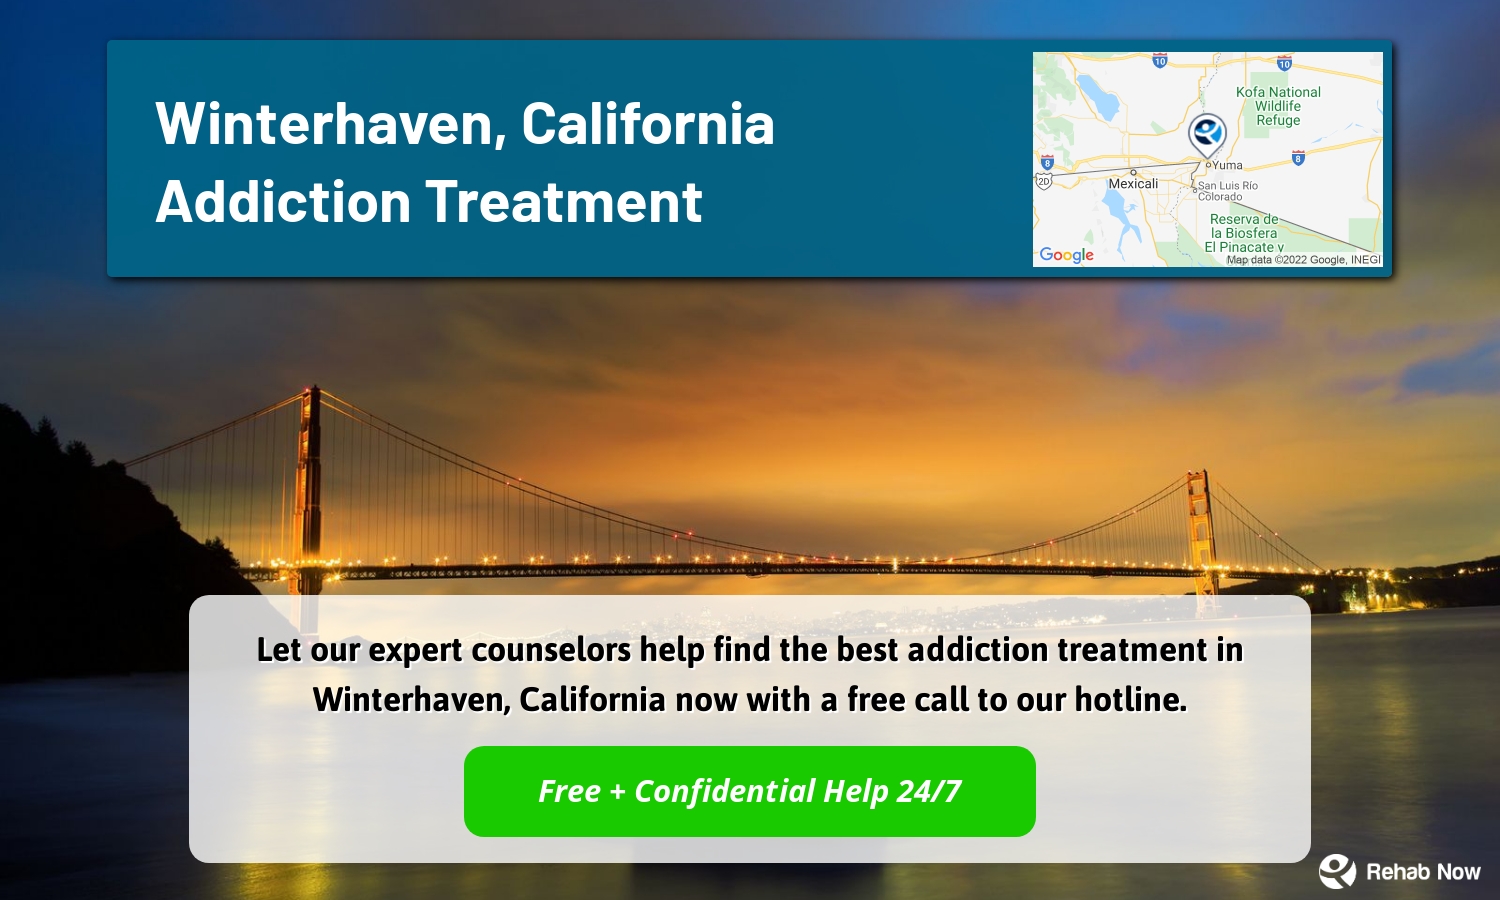 Let our expert counselors help find the best addiction treatment in Winterhaven, California now with a free call to our hotline.